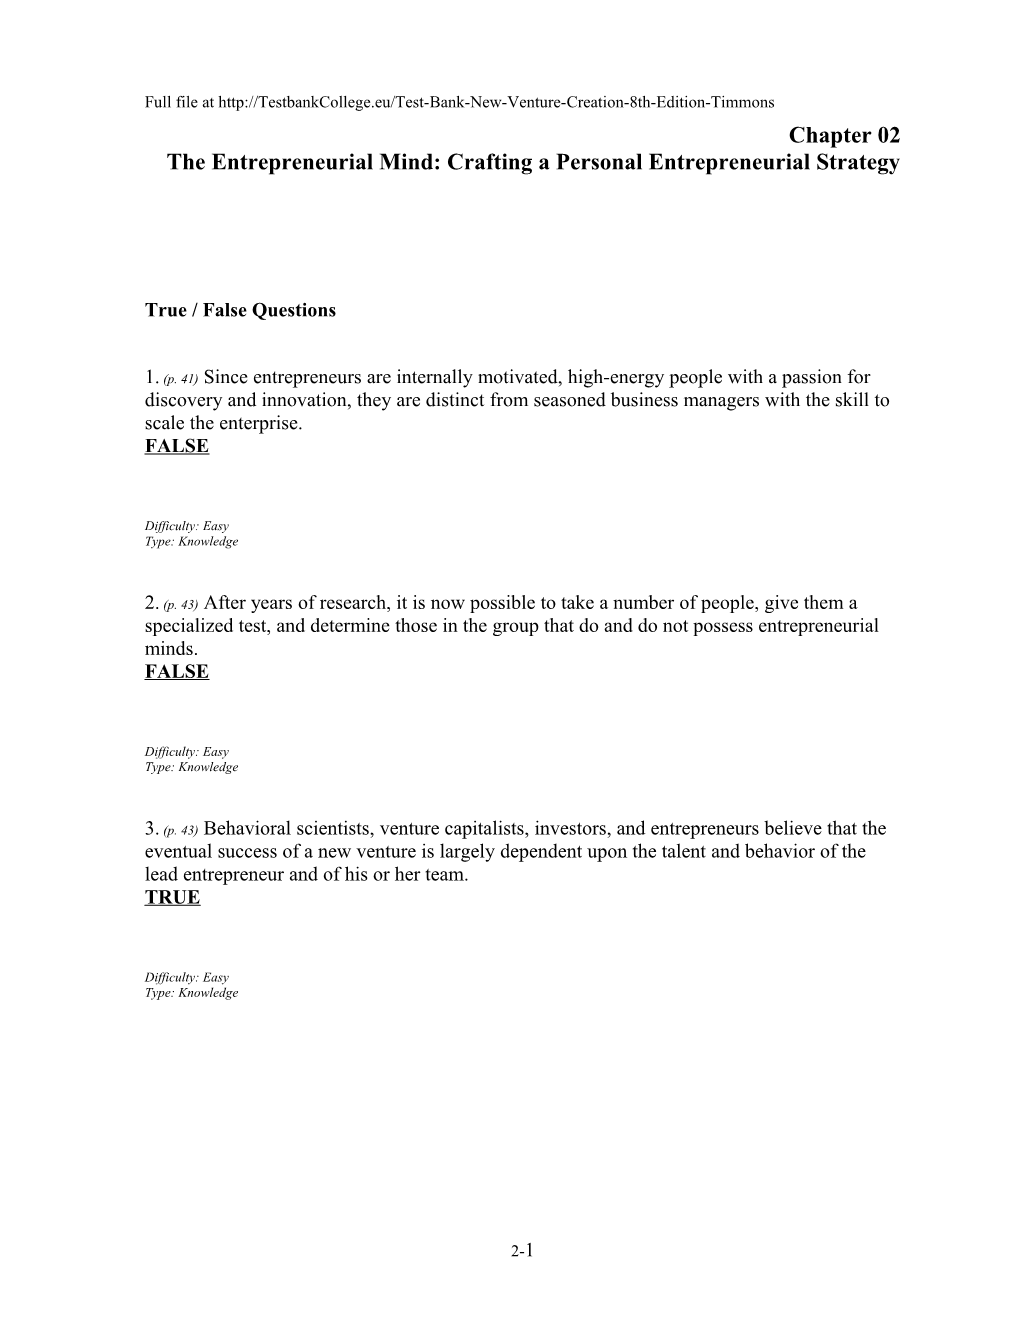 Chapter 02 the Entrepreneurial Mind: Crafting a Personal Entrepreneurial Strate